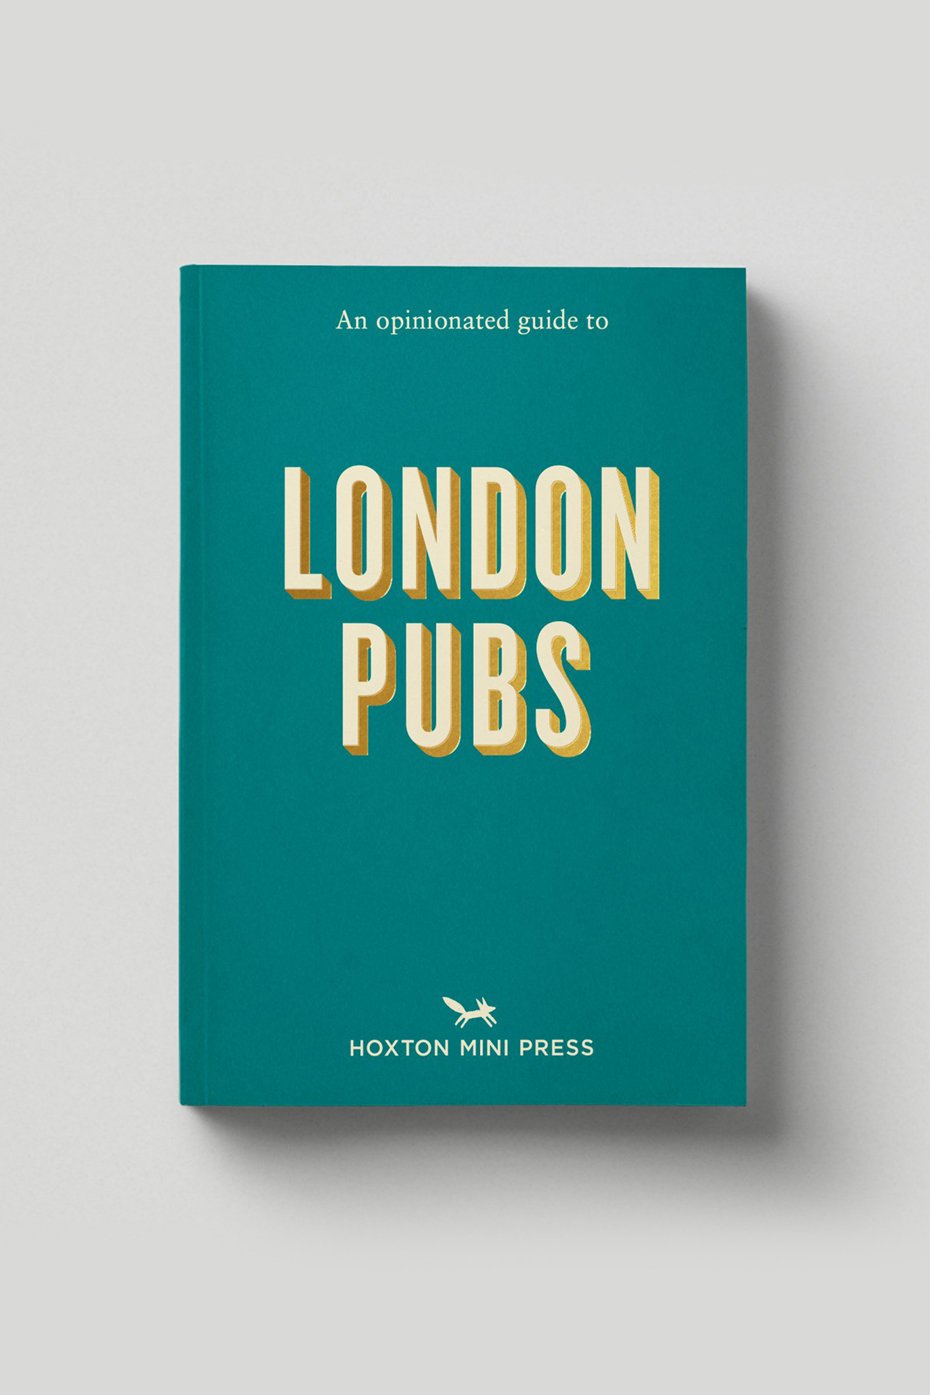 Turnaround Books An Opinionated Guide To London Pubs By Hoxton Mini Press